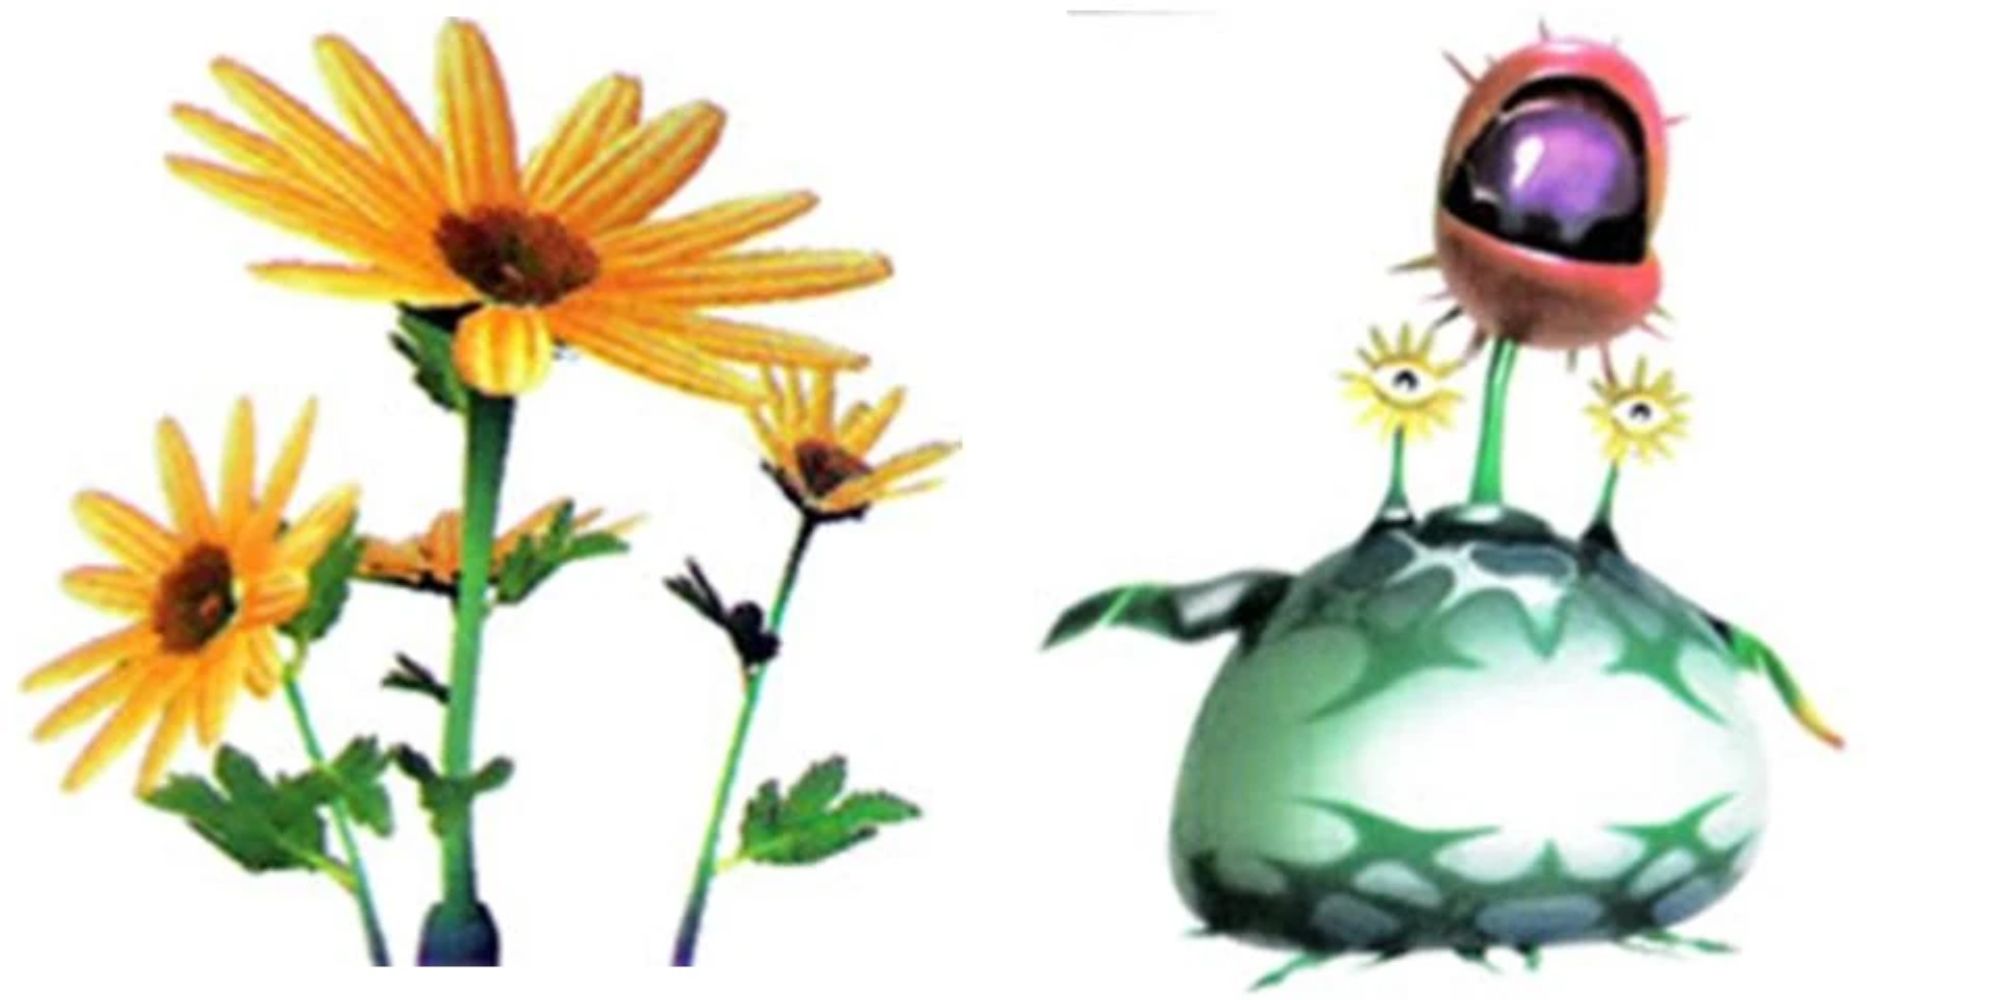 An image of a Creeping Chrysanthemum from Pikmin, a large plant-like enemy.